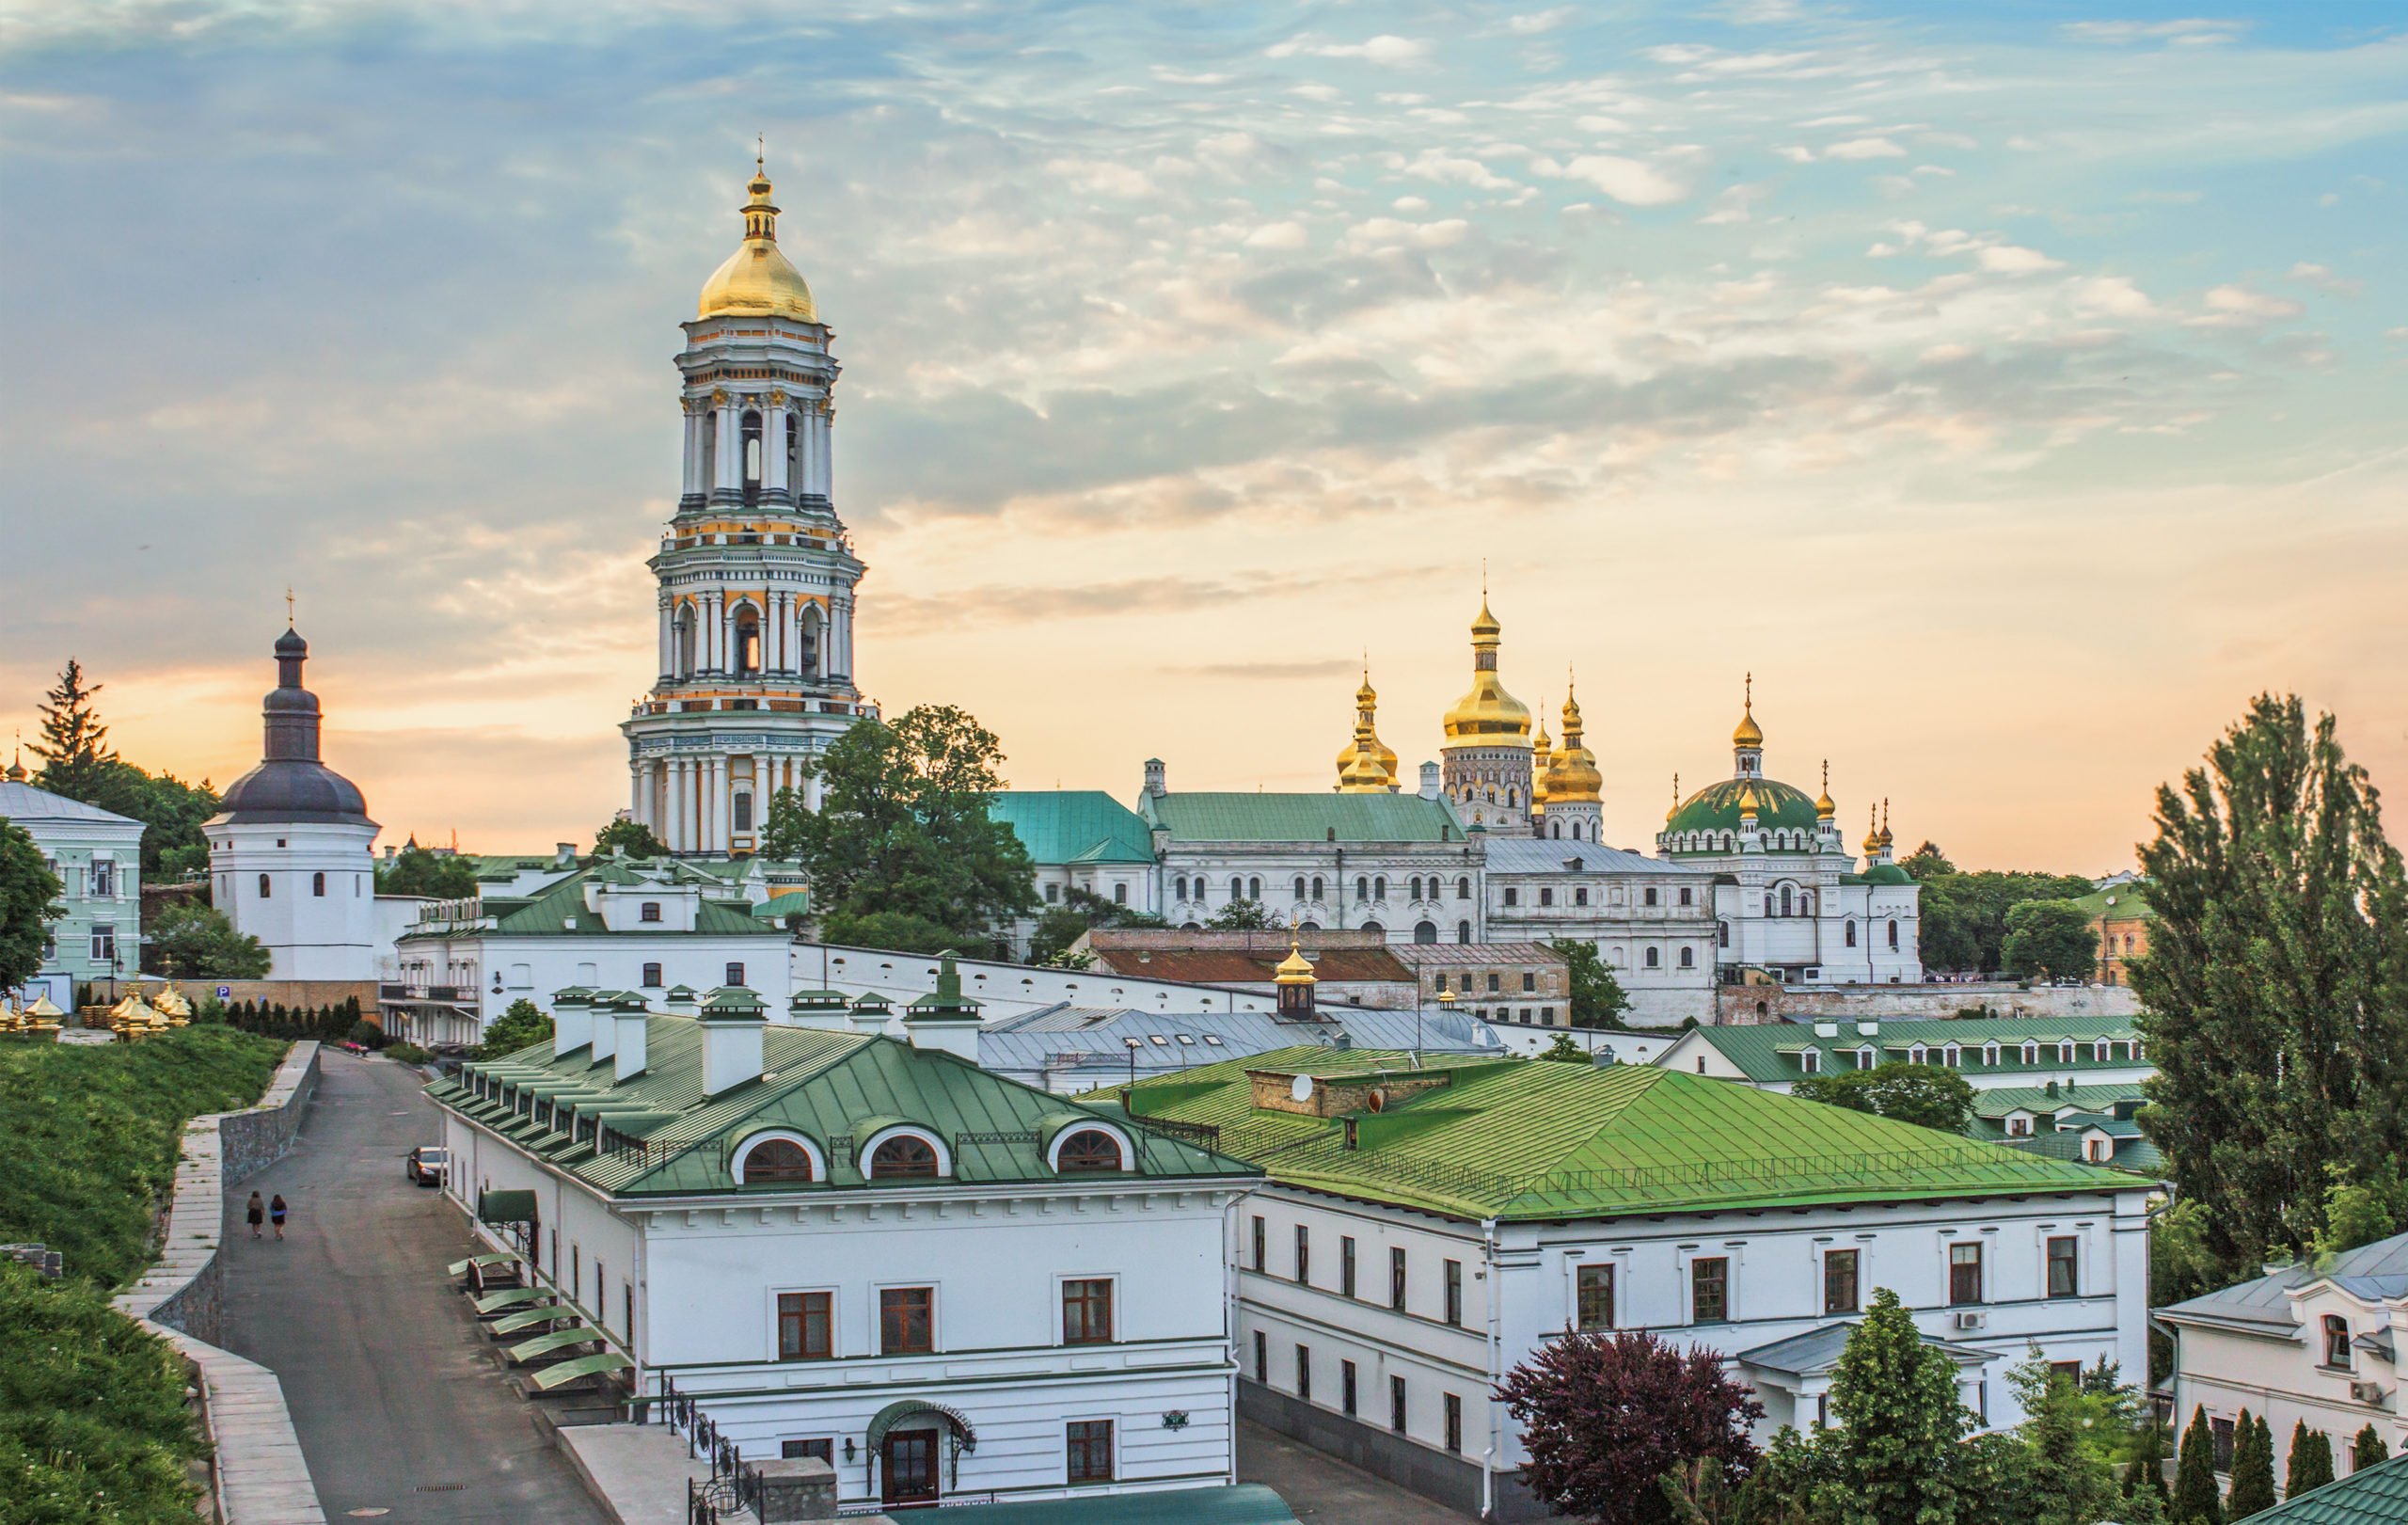 Kyiv - capital city of Ukraine - one of the upcoming best countries for digital nomads